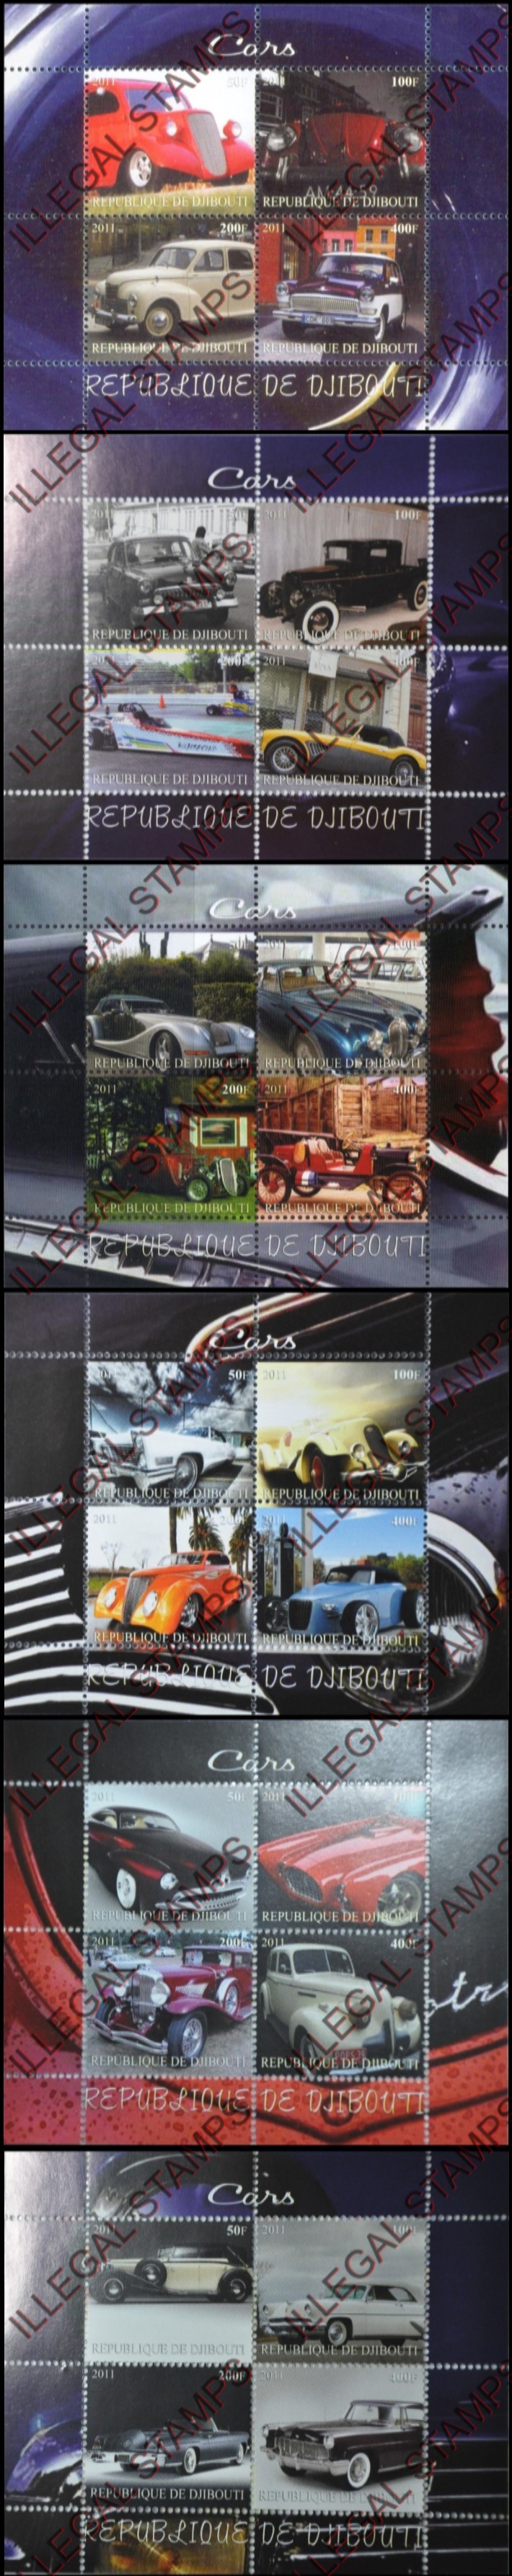 Djibouti 2011 Cars Illegal Stamp Souvenir Sheets of 4 (Part 1)